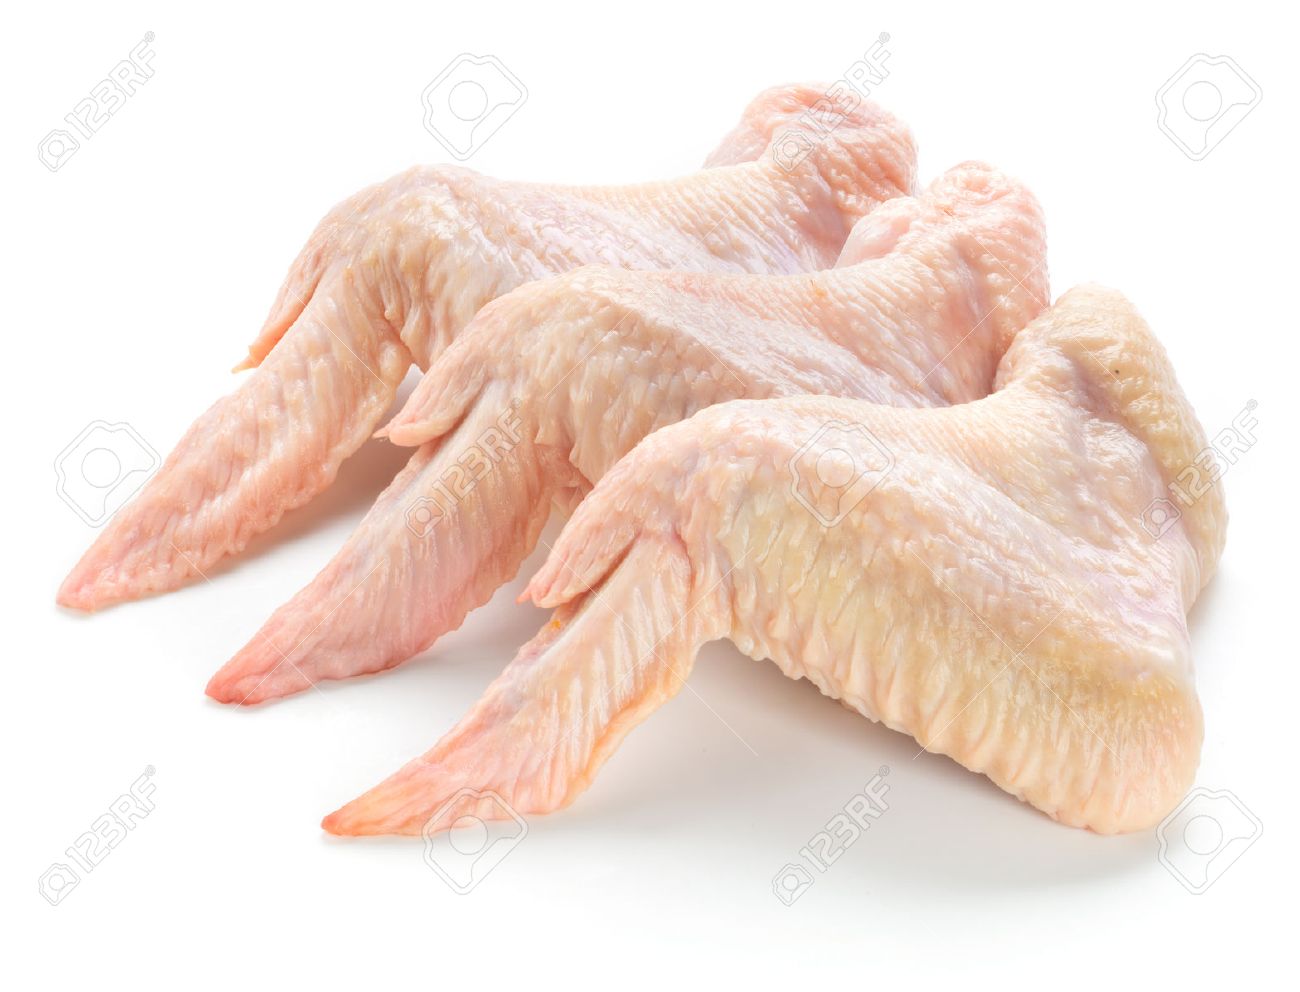 Chicken Wings - Pack of 4 Whole Wings ($6/lb)